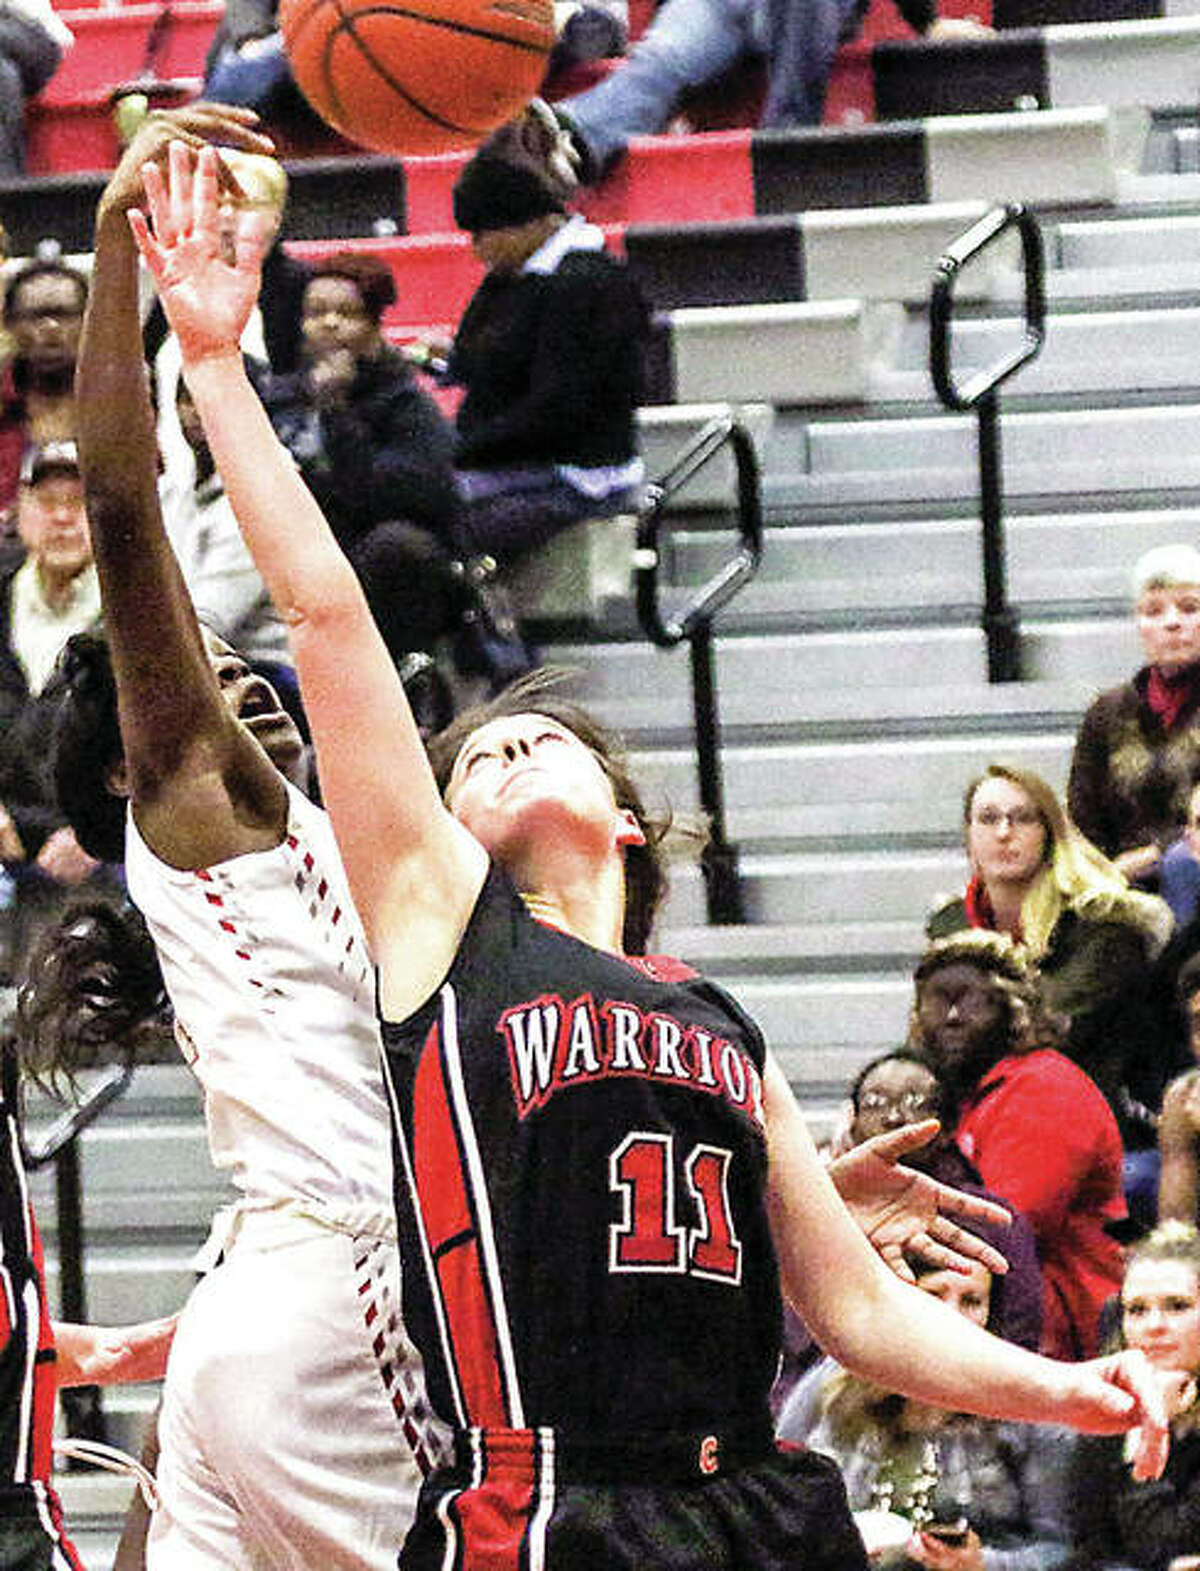 Emily McBride of Calhoun (11) led the Warriors with 14 points in 1 49-44 loss to Brown County Wednesday night in Mount Sterling. She is shown in action earlier this season.